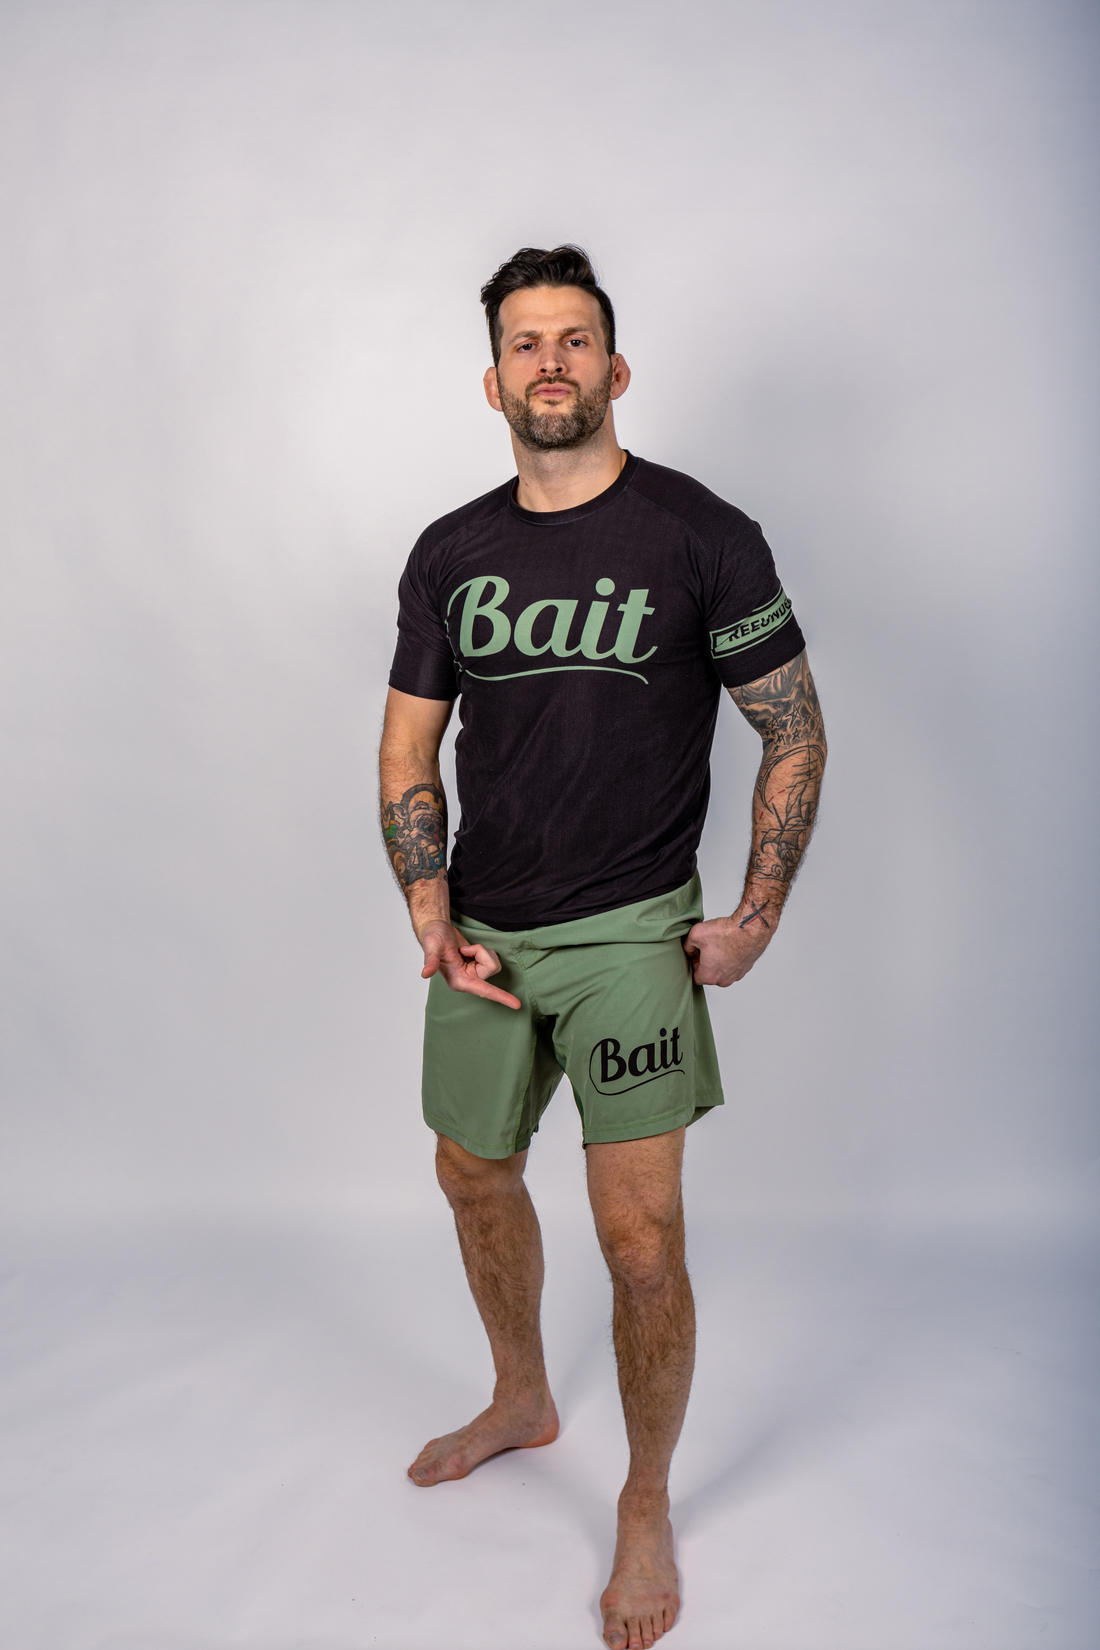 The Bait Apparel Fight Shorts